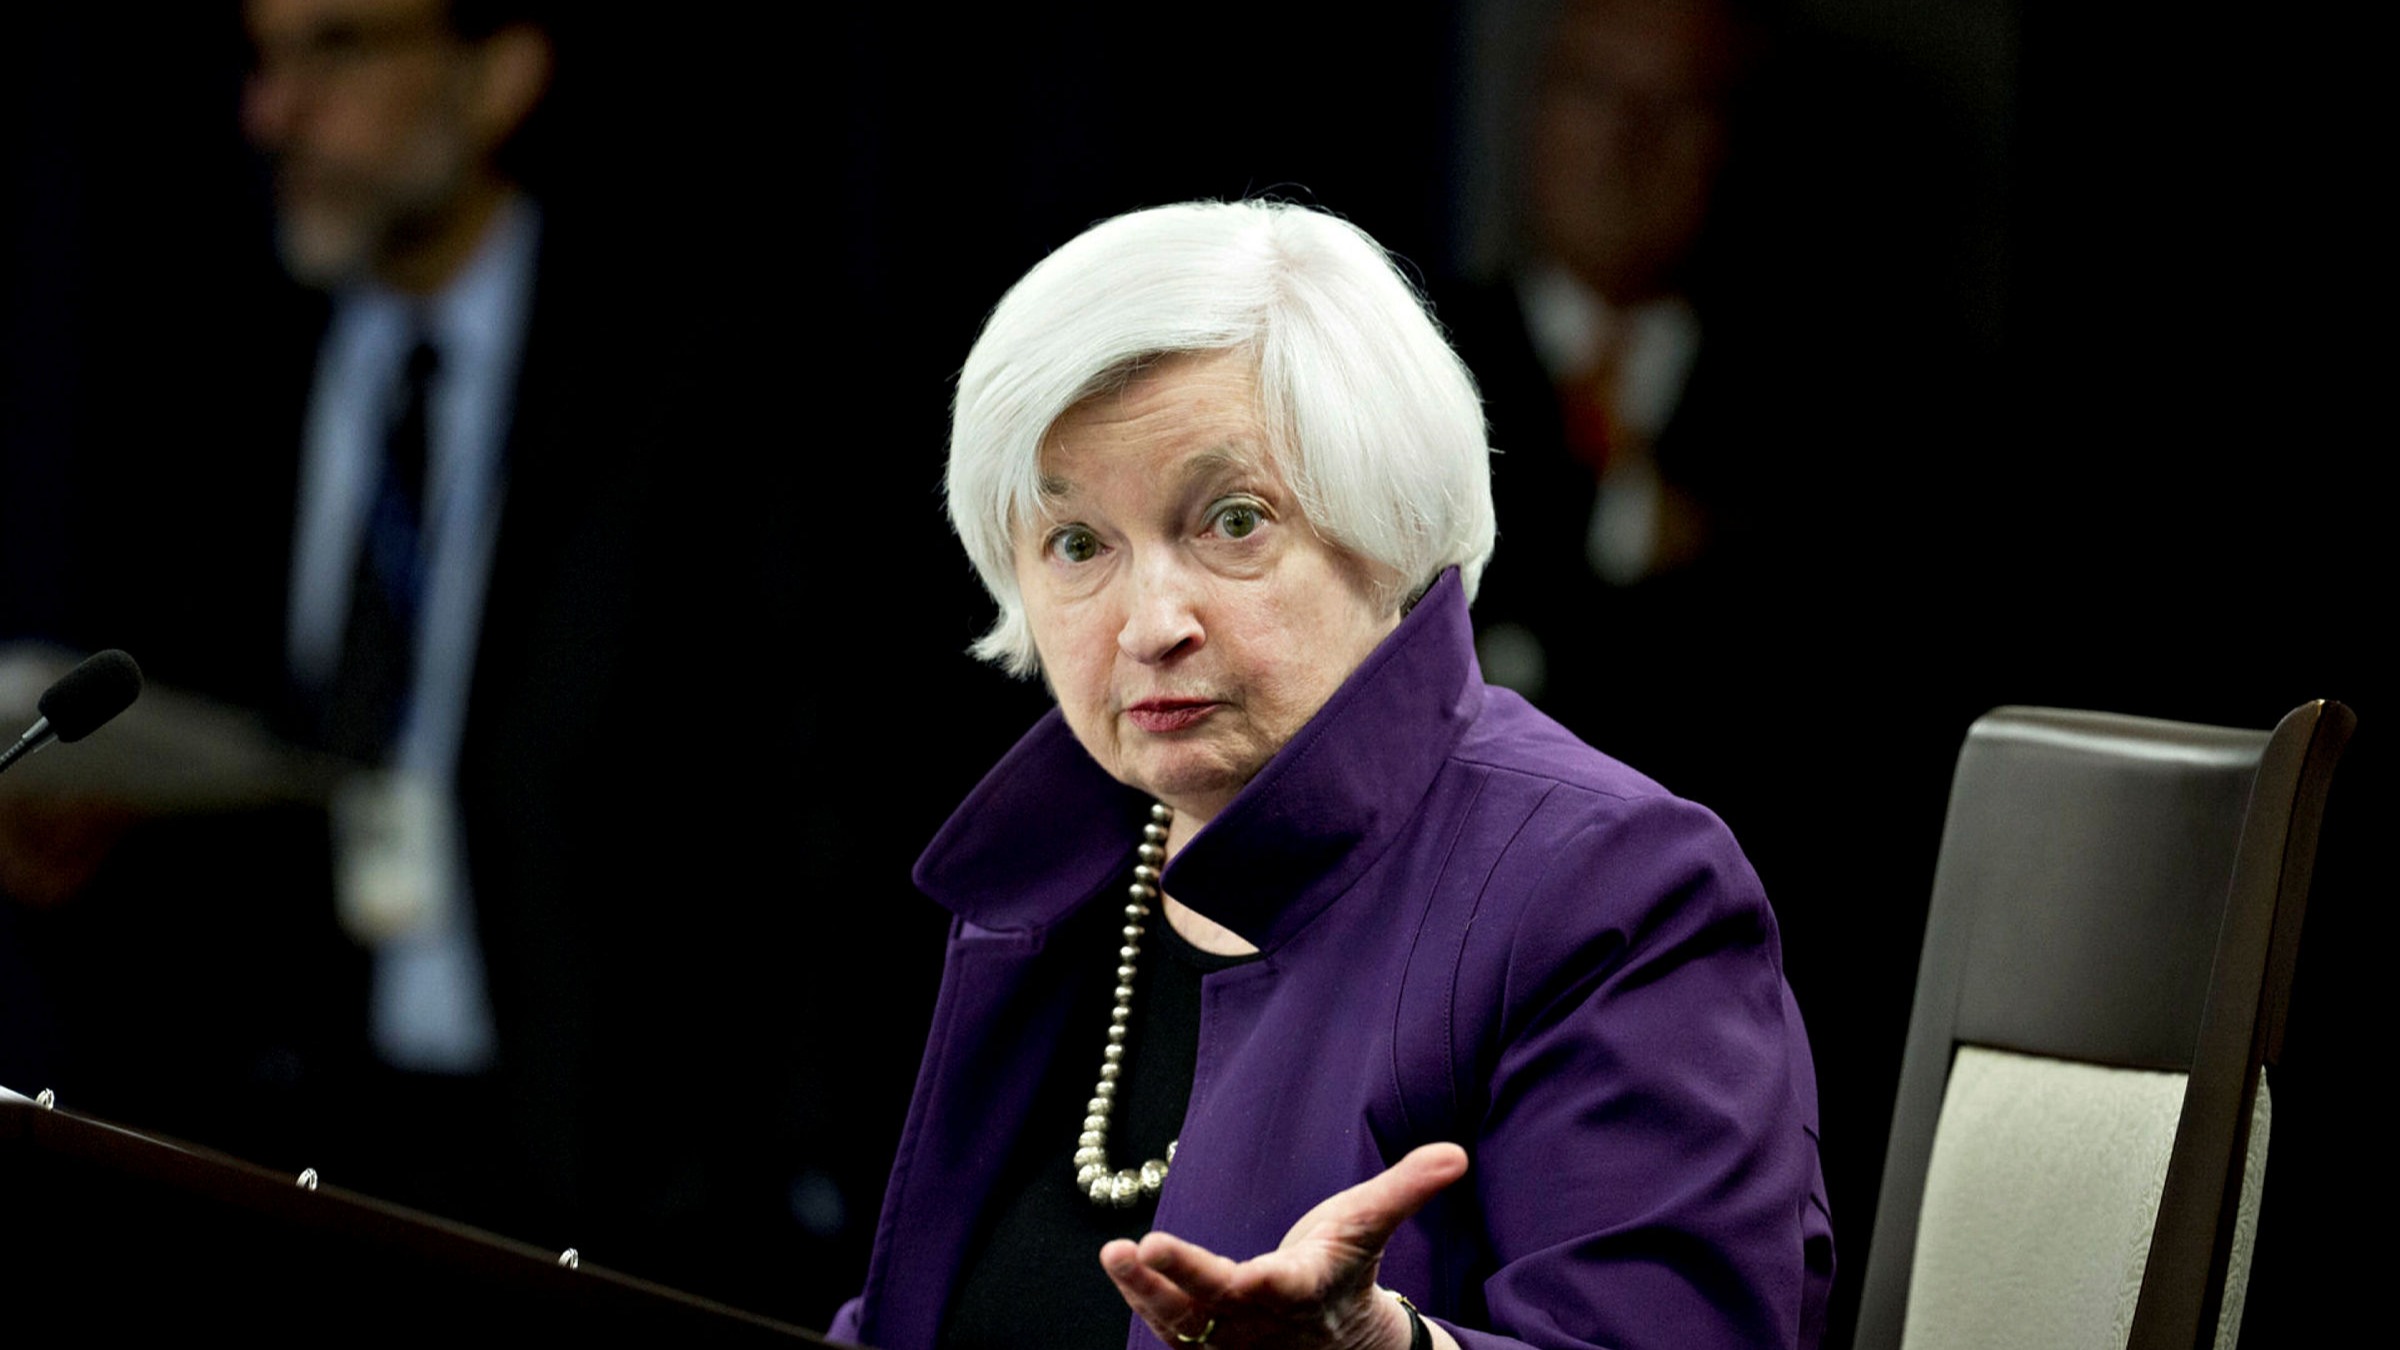 According to US media, Biden appoints Janet Yellen as finance minister